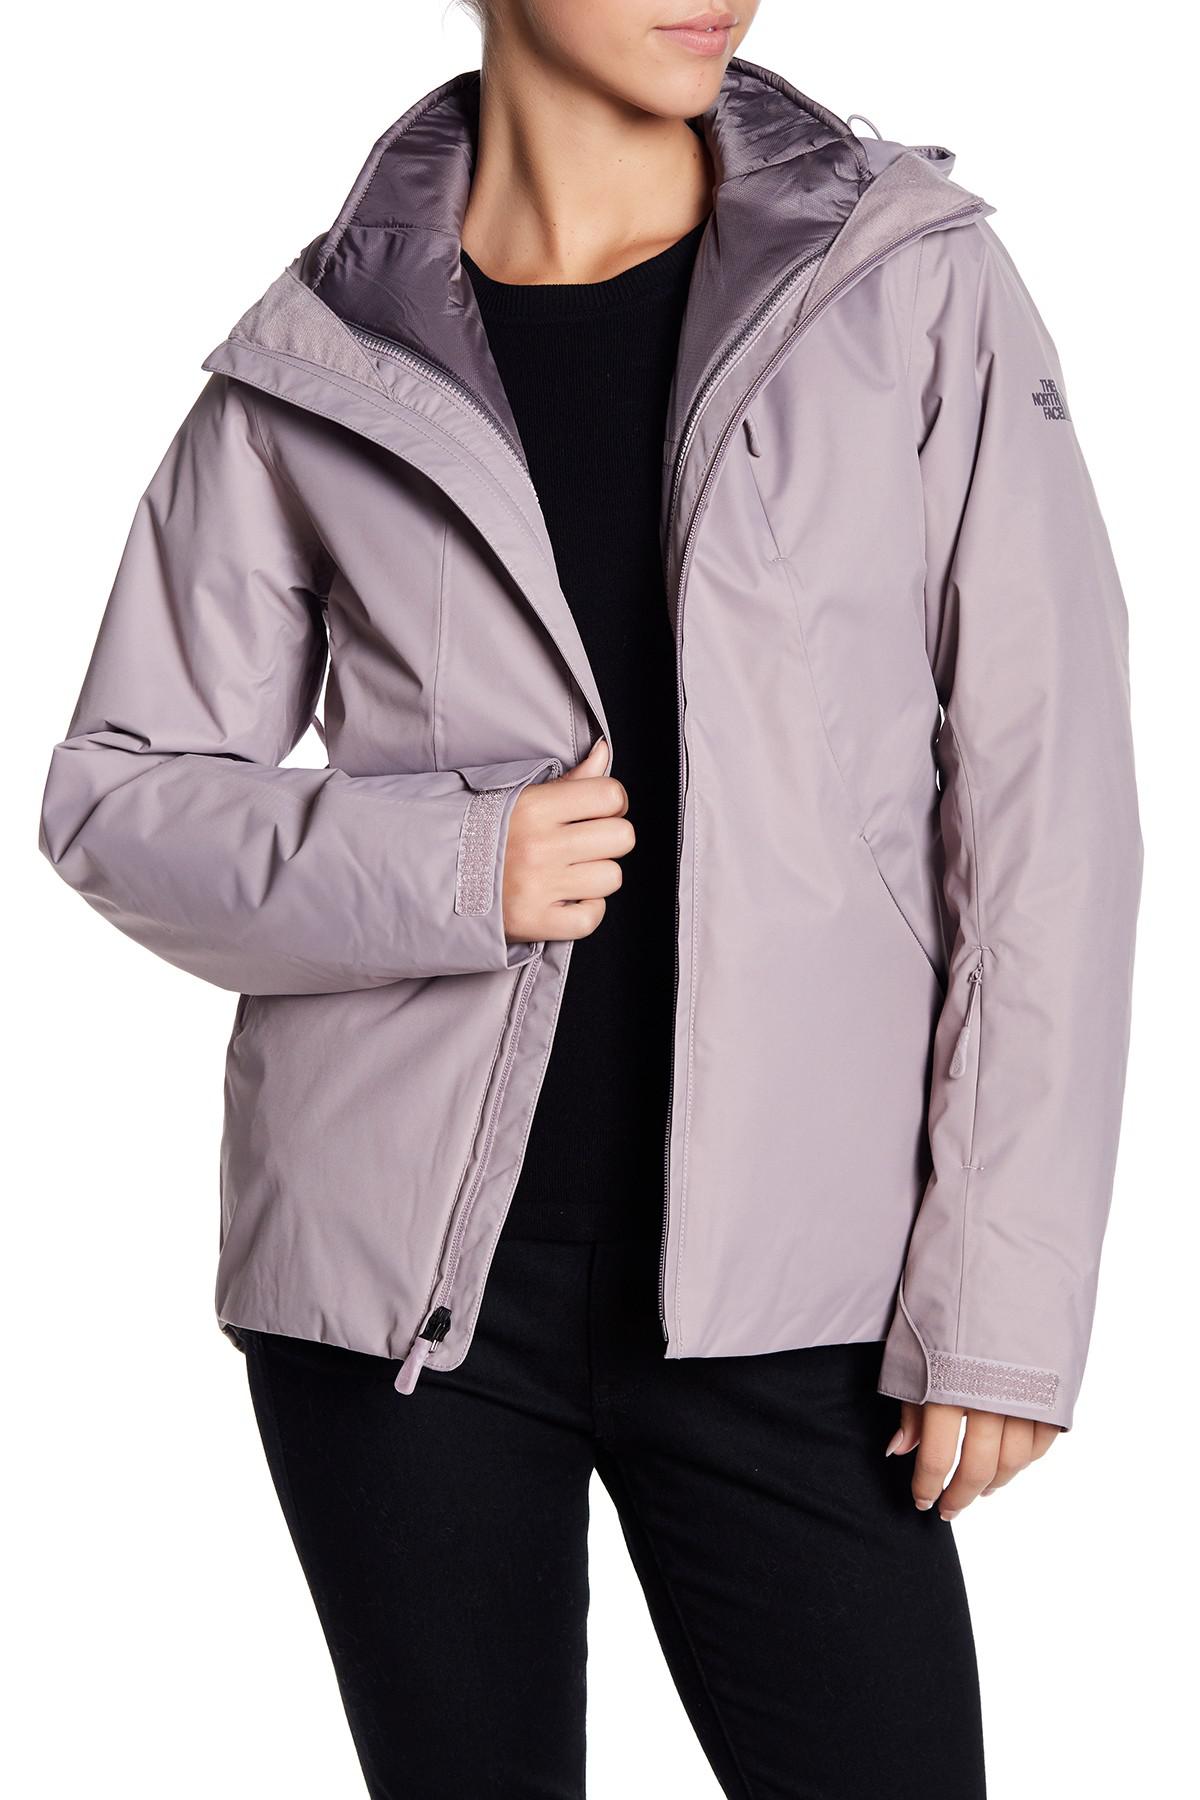 north face triclimate clementine